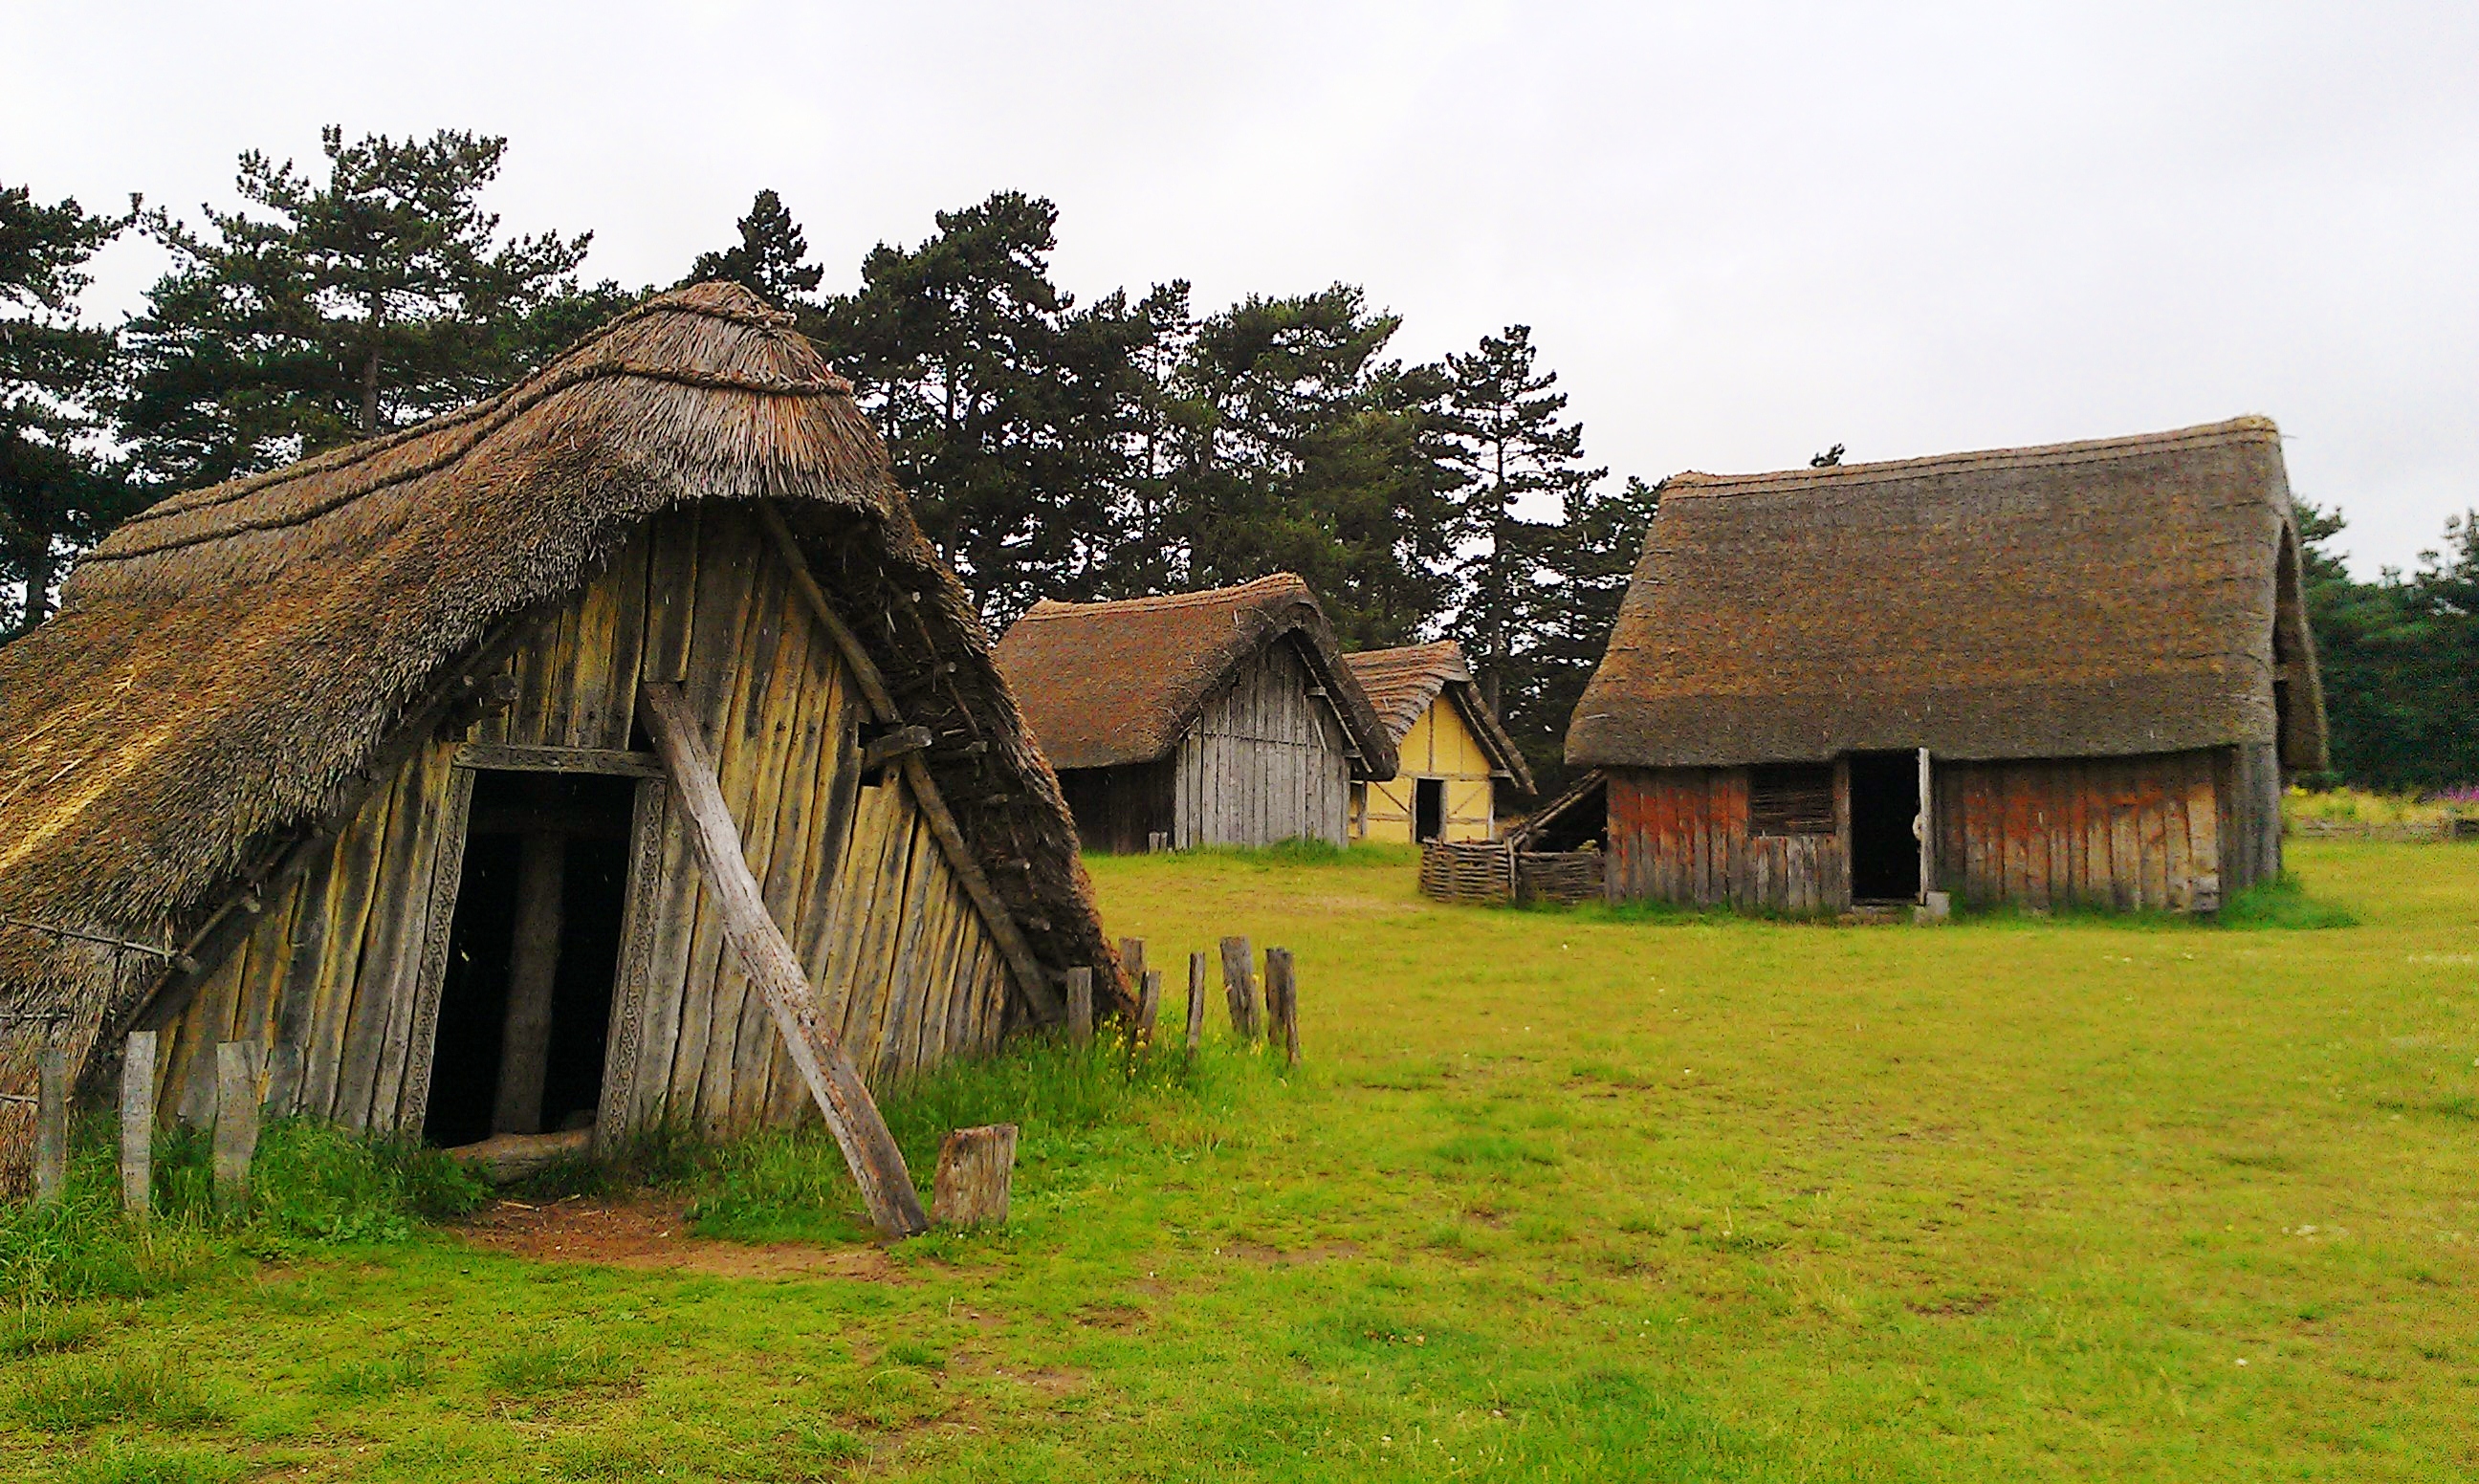 File:West Stow Anglo-Saxon village 2.jpg - Wikimedia Commons